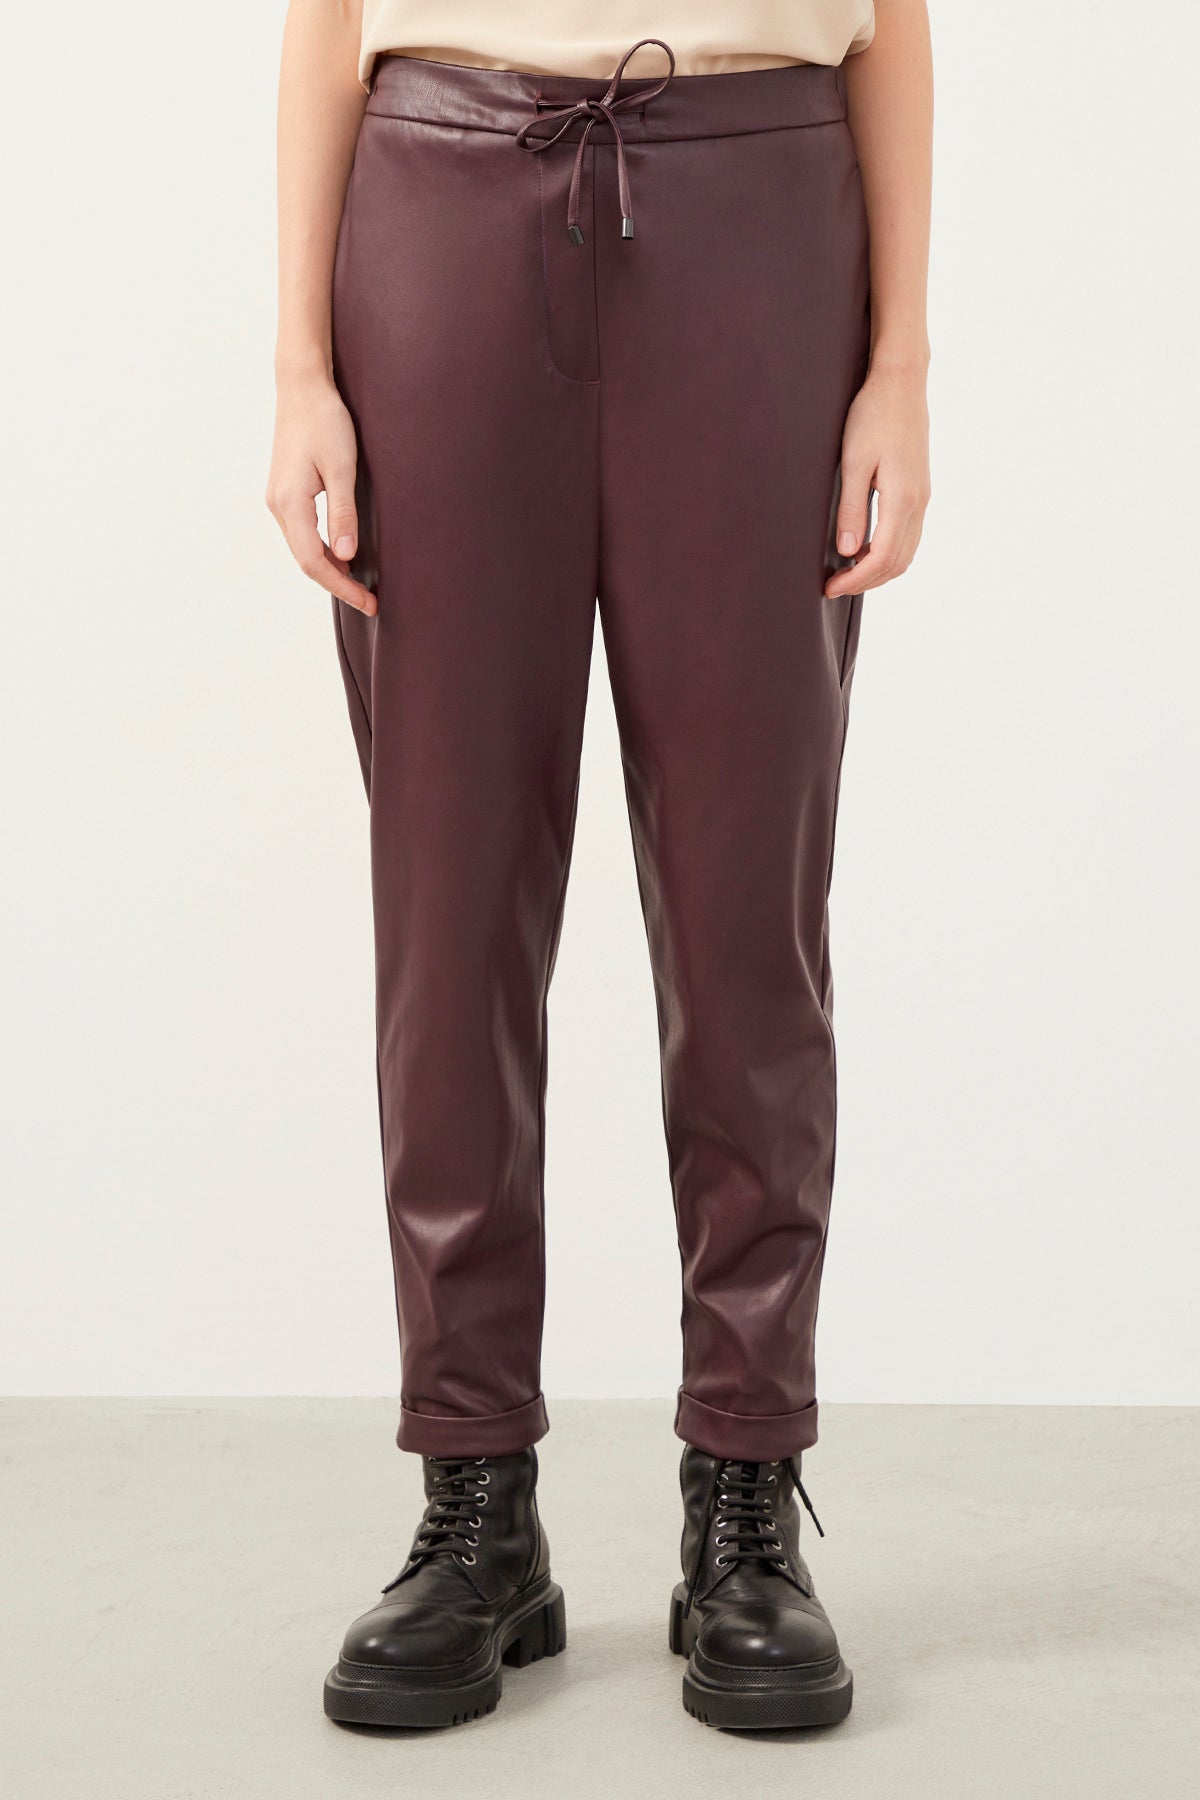 Burgundy Leather-Look Carrot Trousers